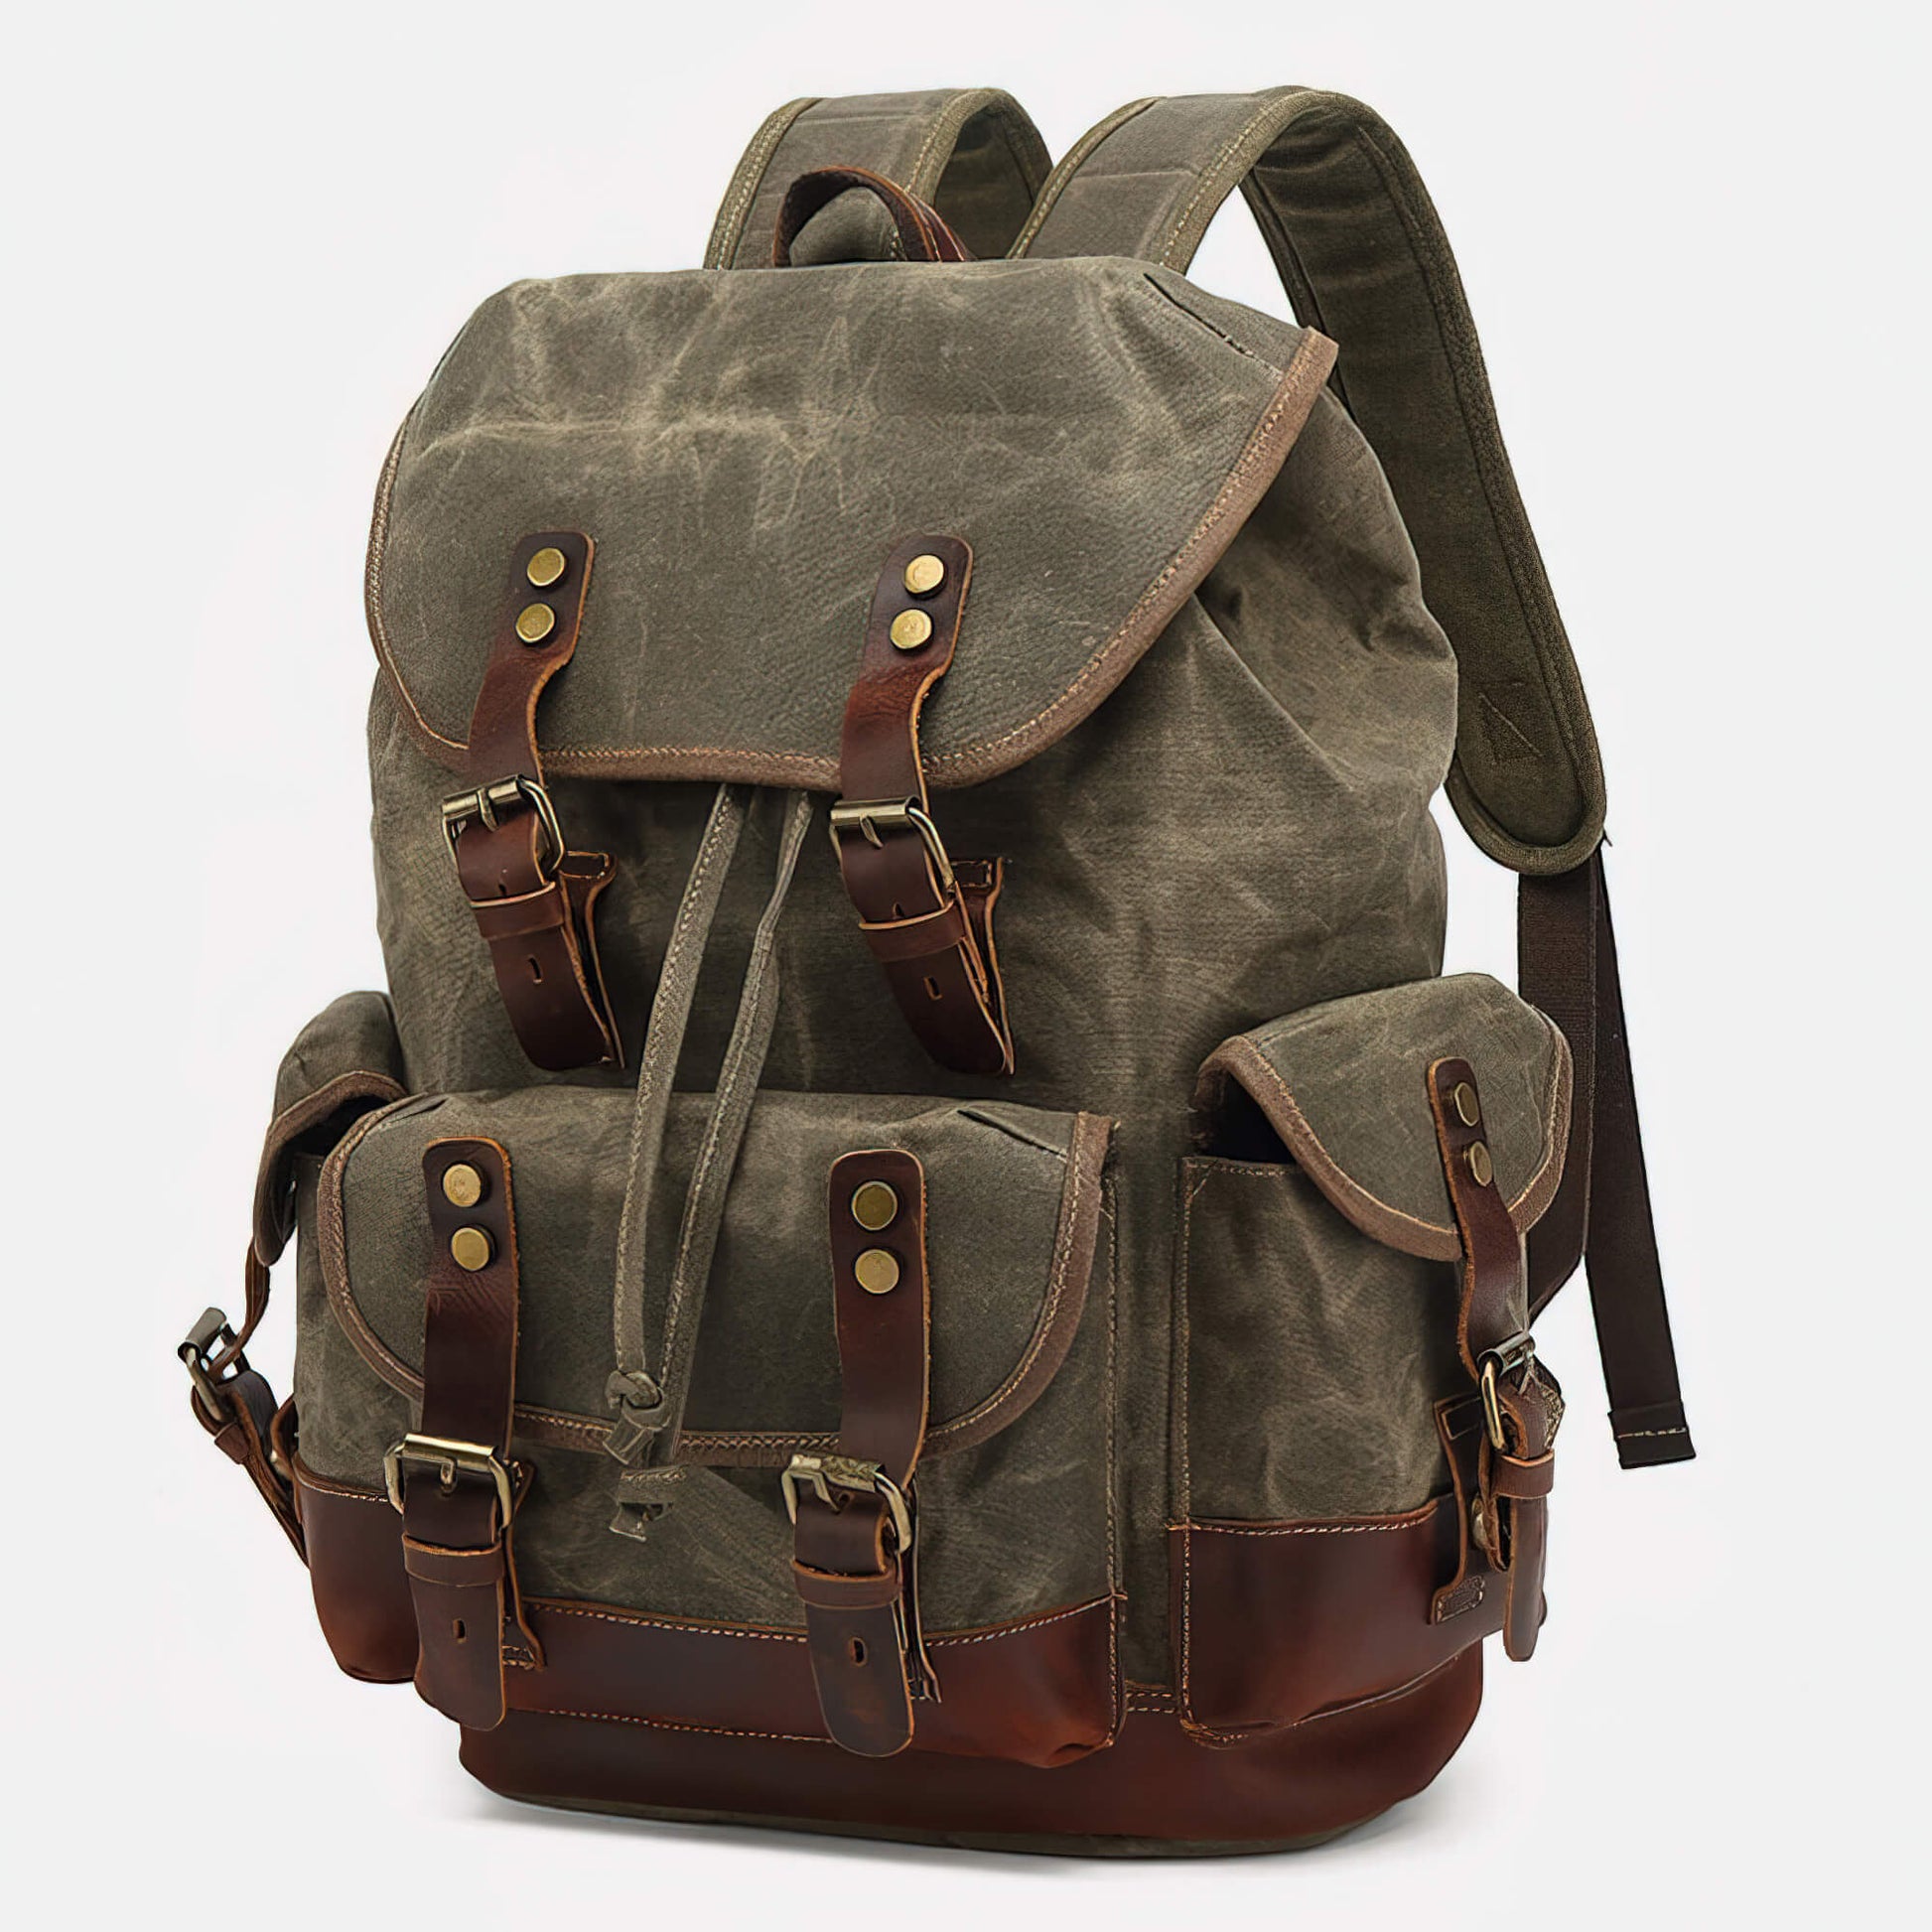 Large Waxed Canvas Backpack, Travel Backpack